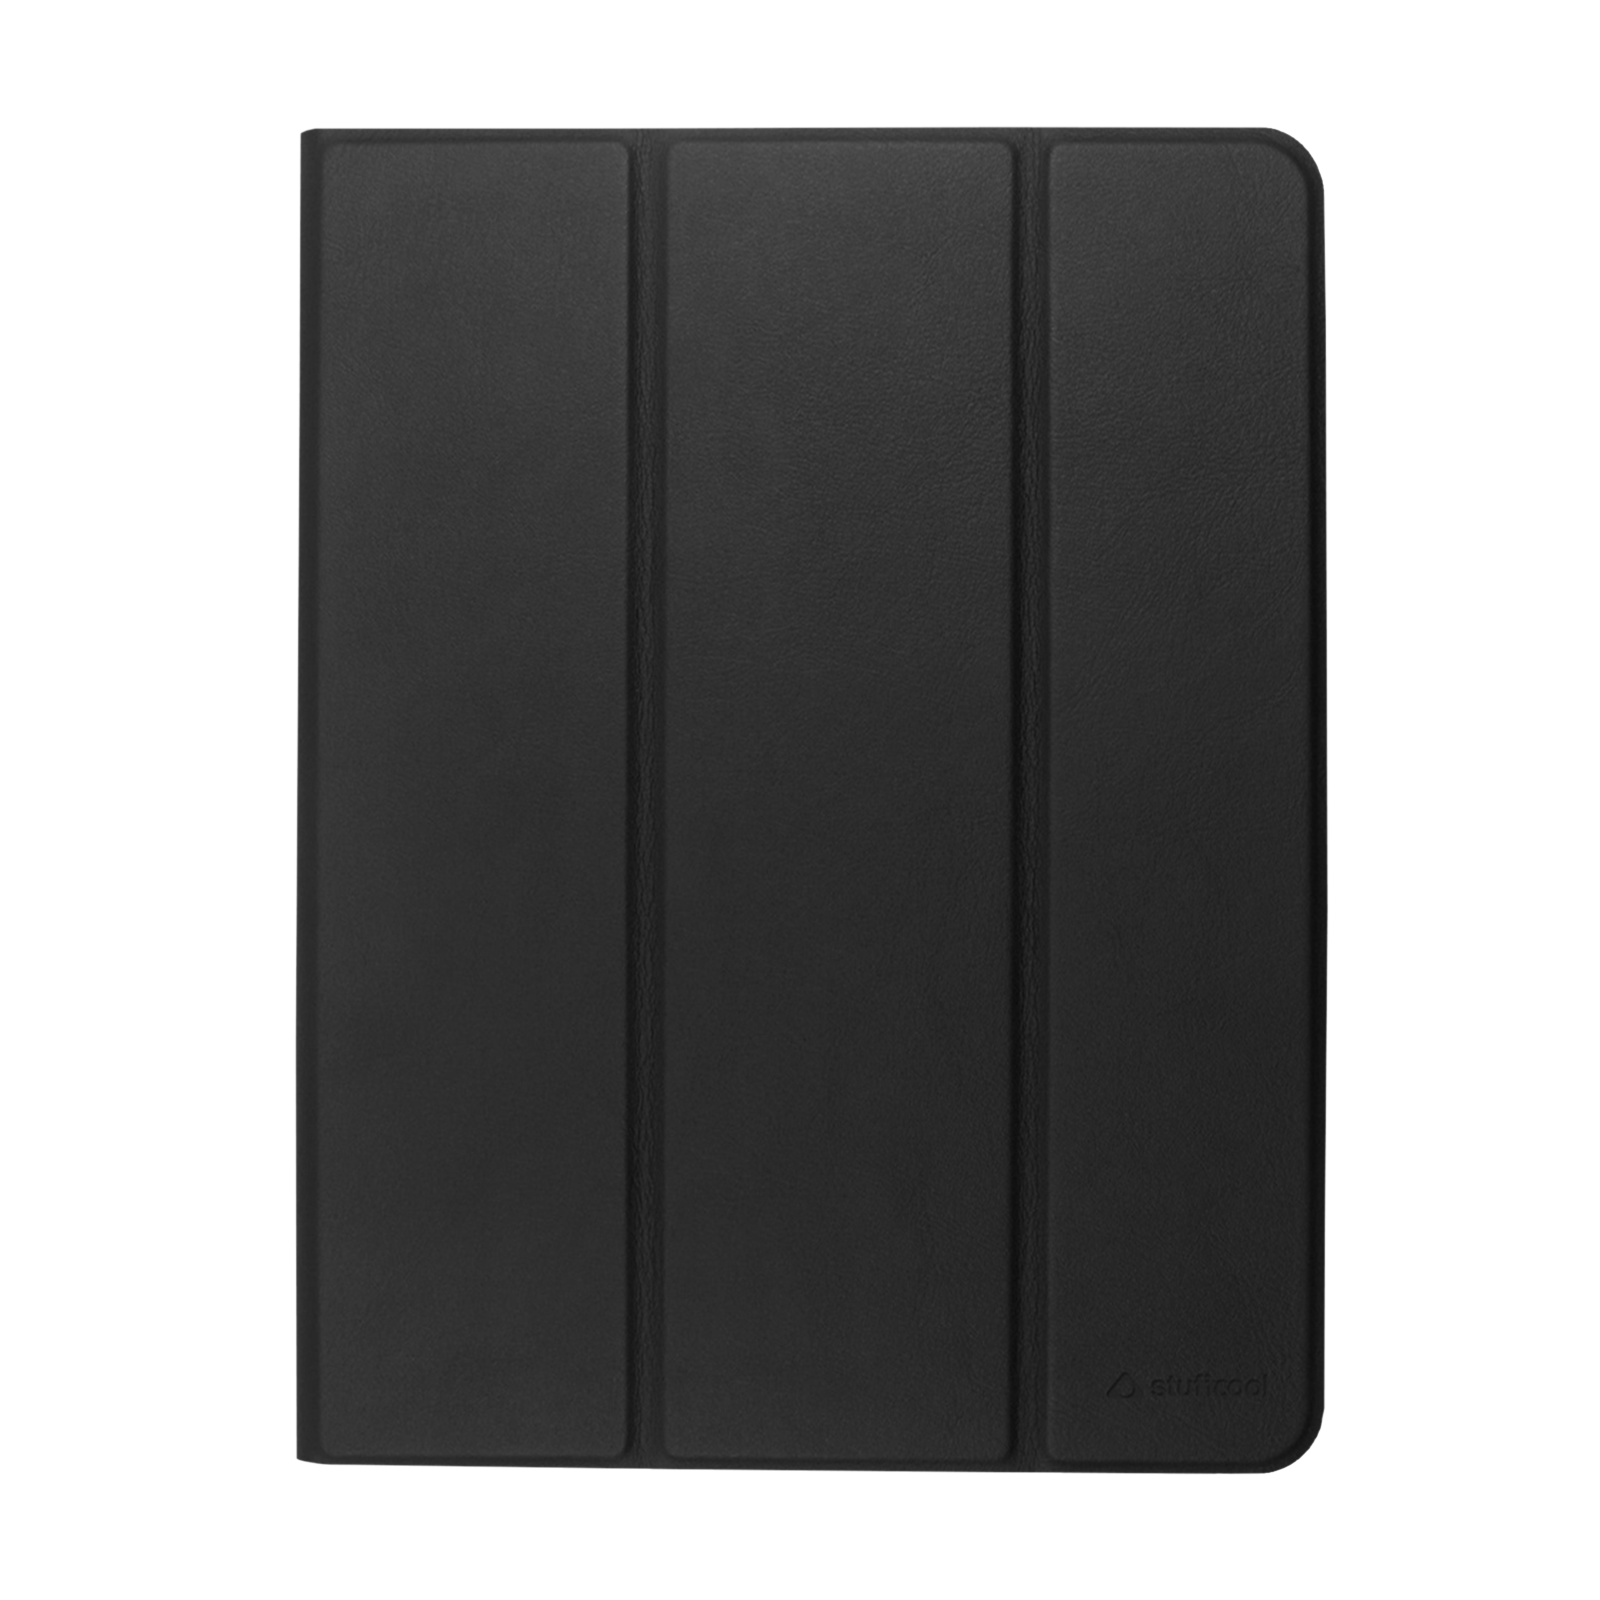 Stuffcool Flex Faux Leather Flip Cover for Apple iPad Pro 11 Inch (4th Gen) (Built-in Pencil Holder, Black)